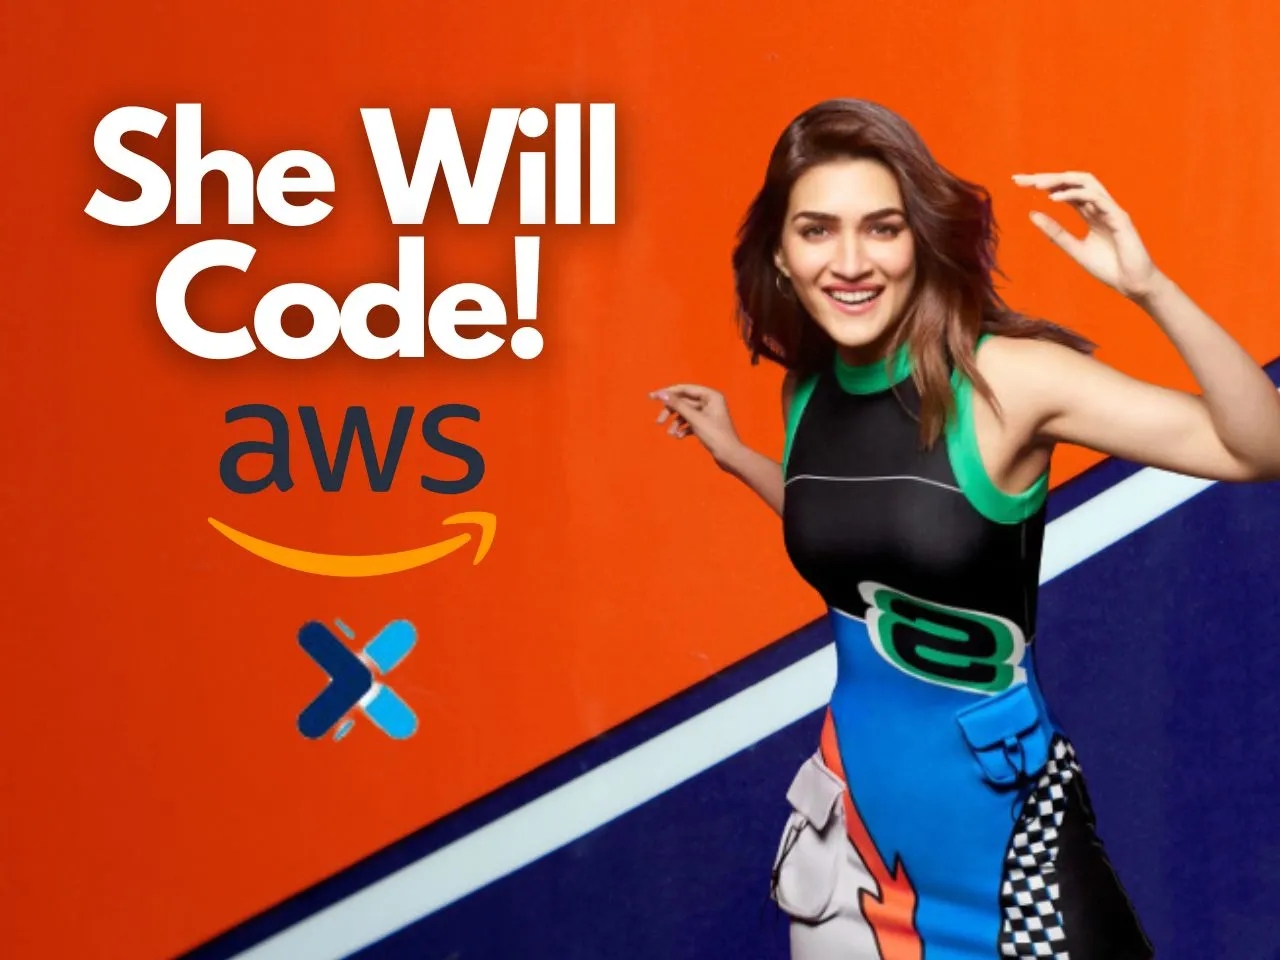 ShellKode & AWS Will Empower Her, Because It's Time For Her To Code!